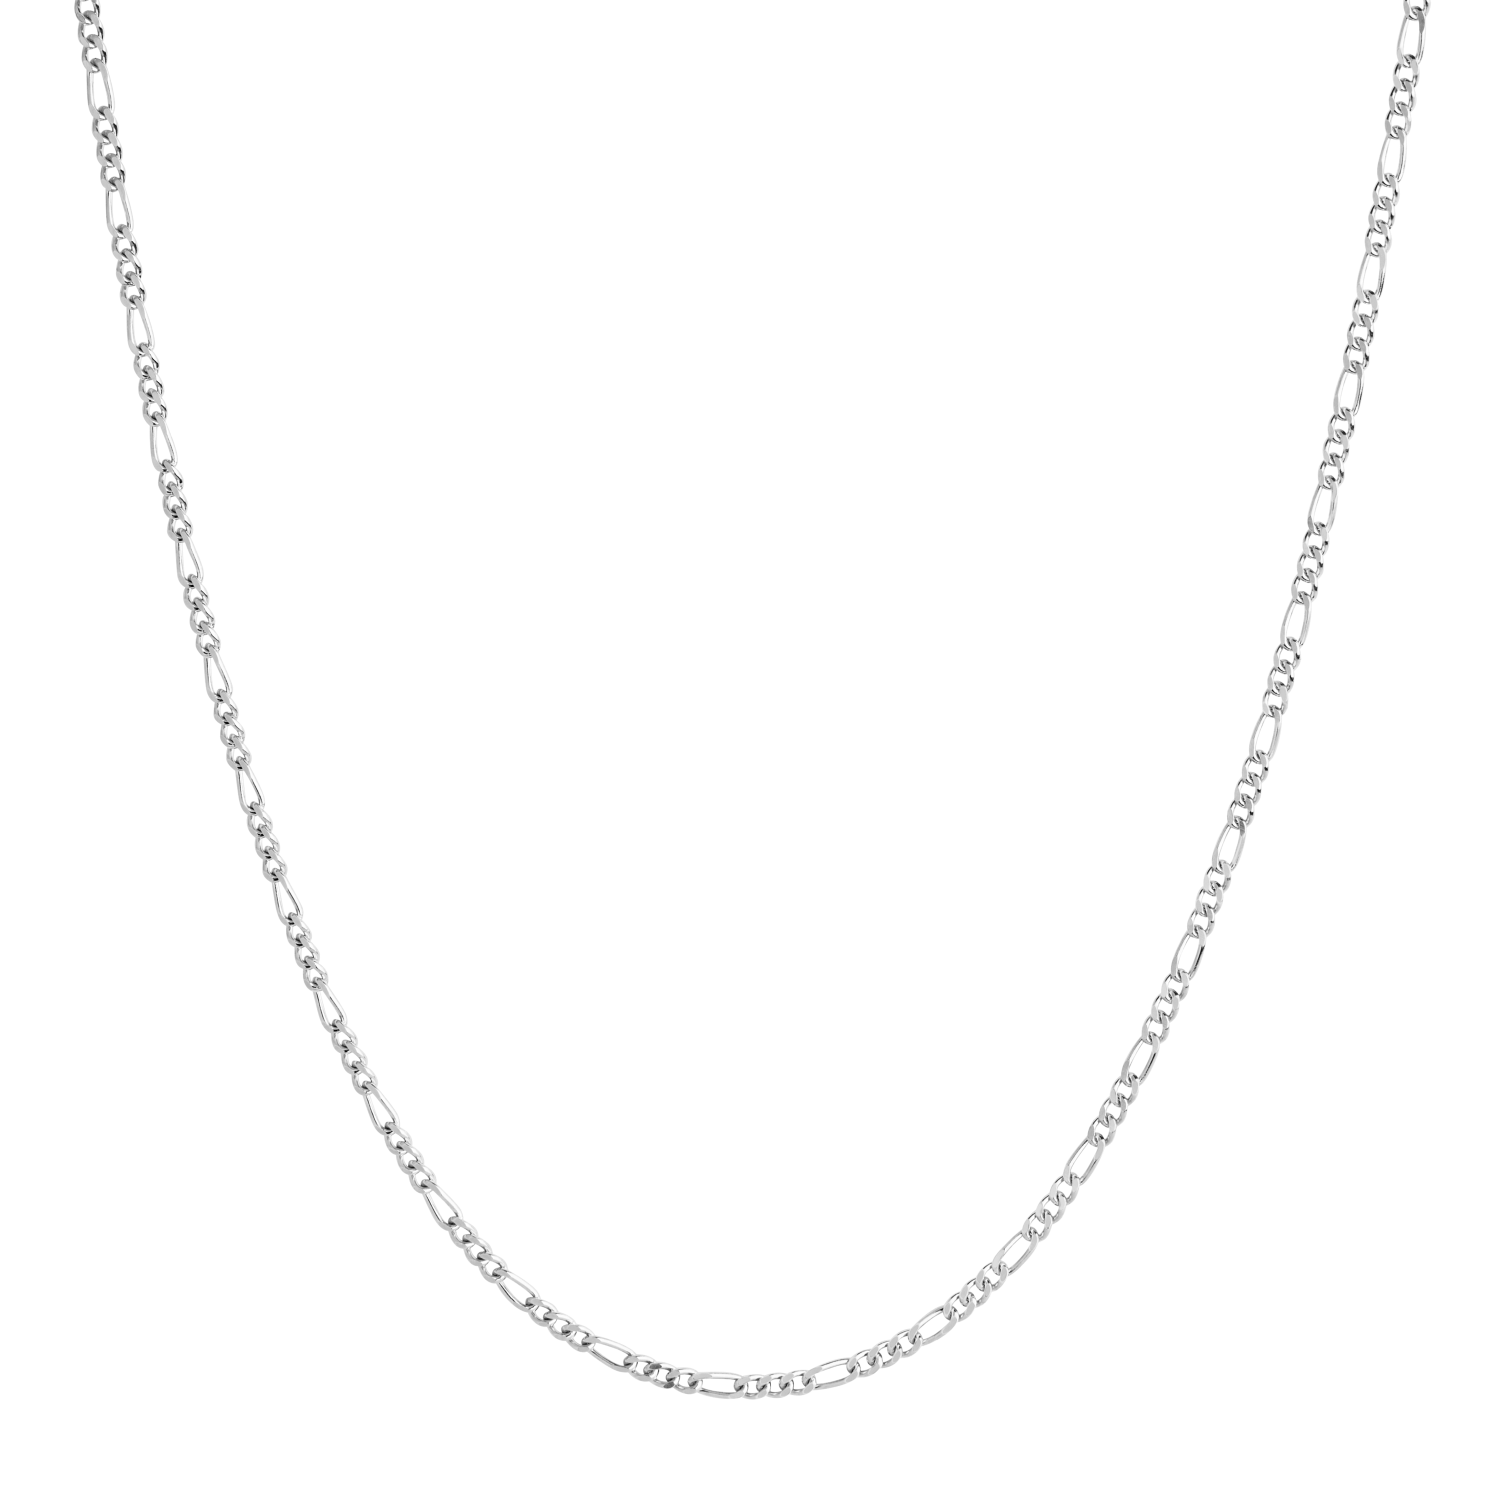 Negroni Necklace Silver